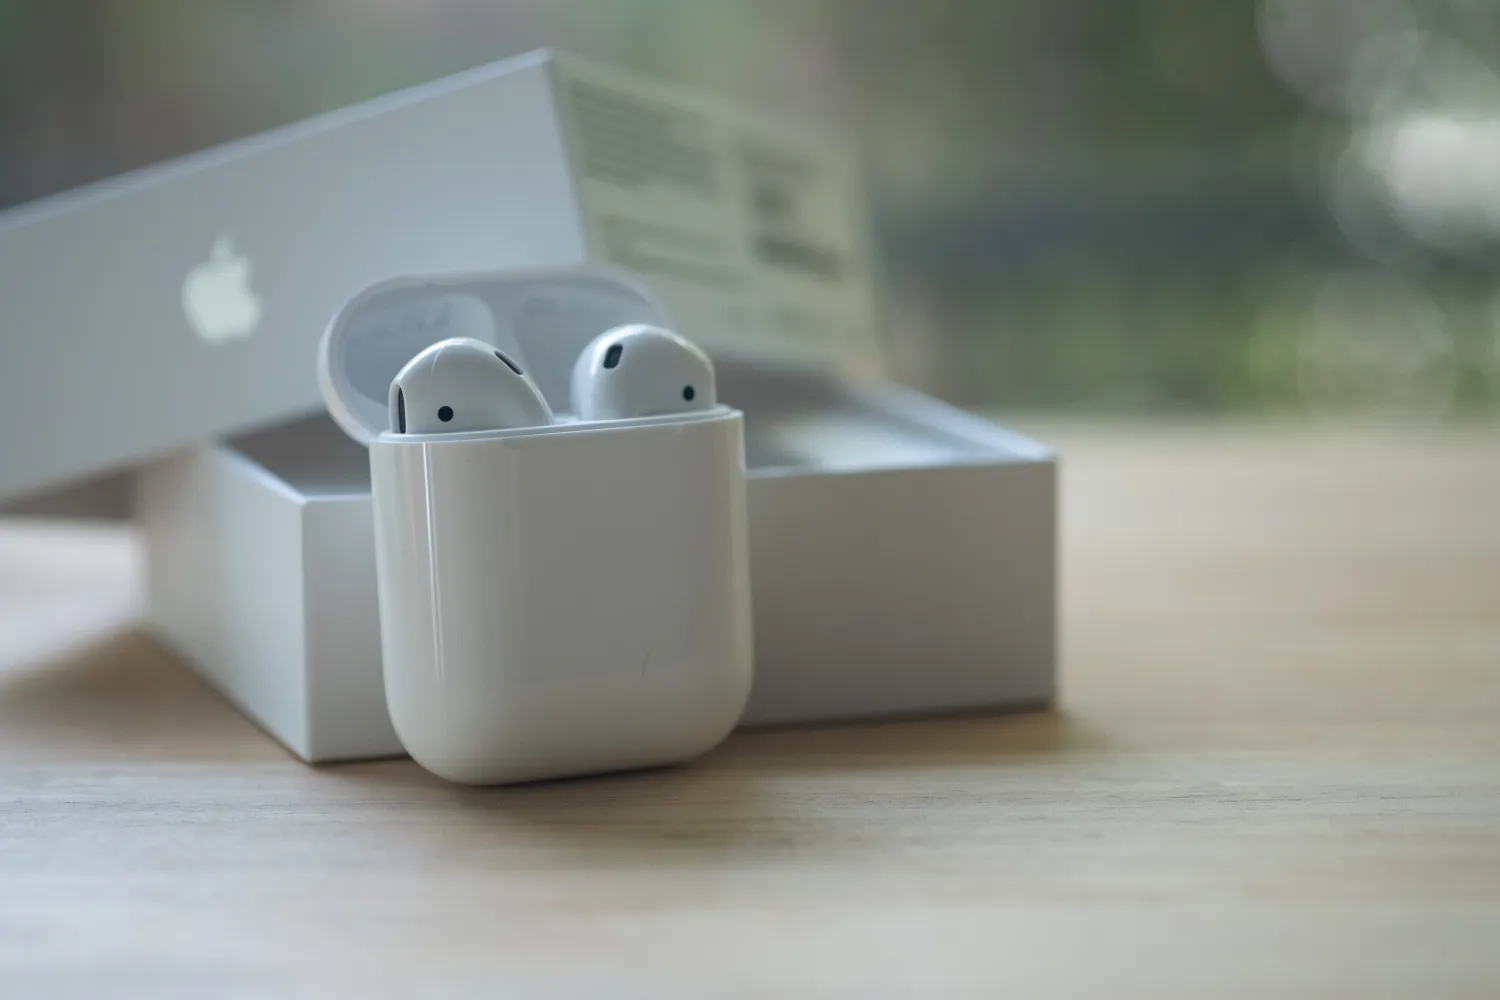 Yes, You Can Connect Your Airpods Your Android Device